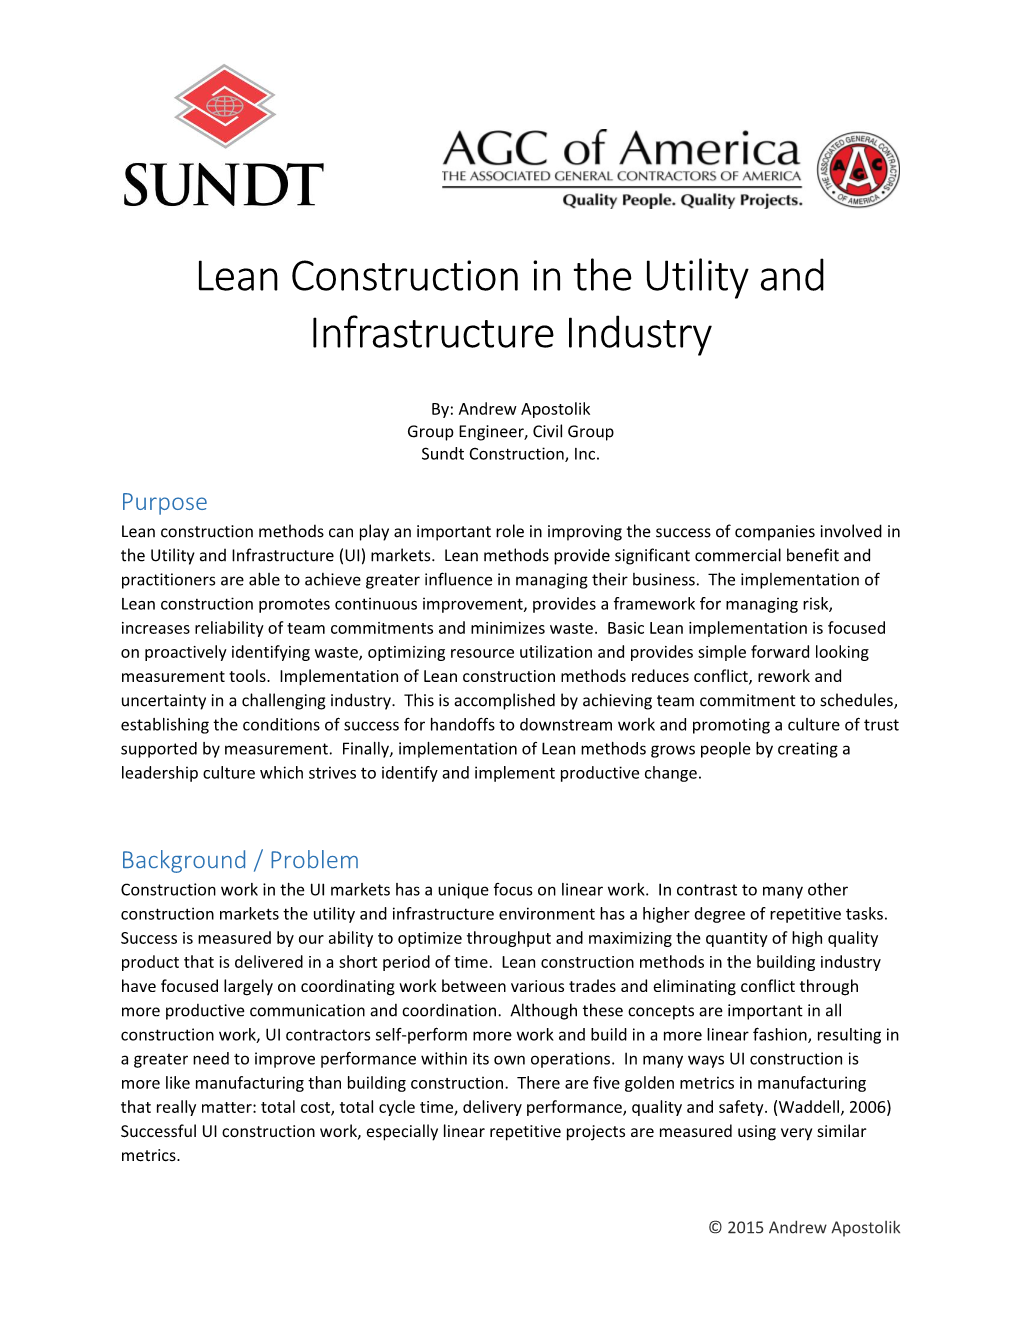 Lean Construction for Utility and Infrastructure